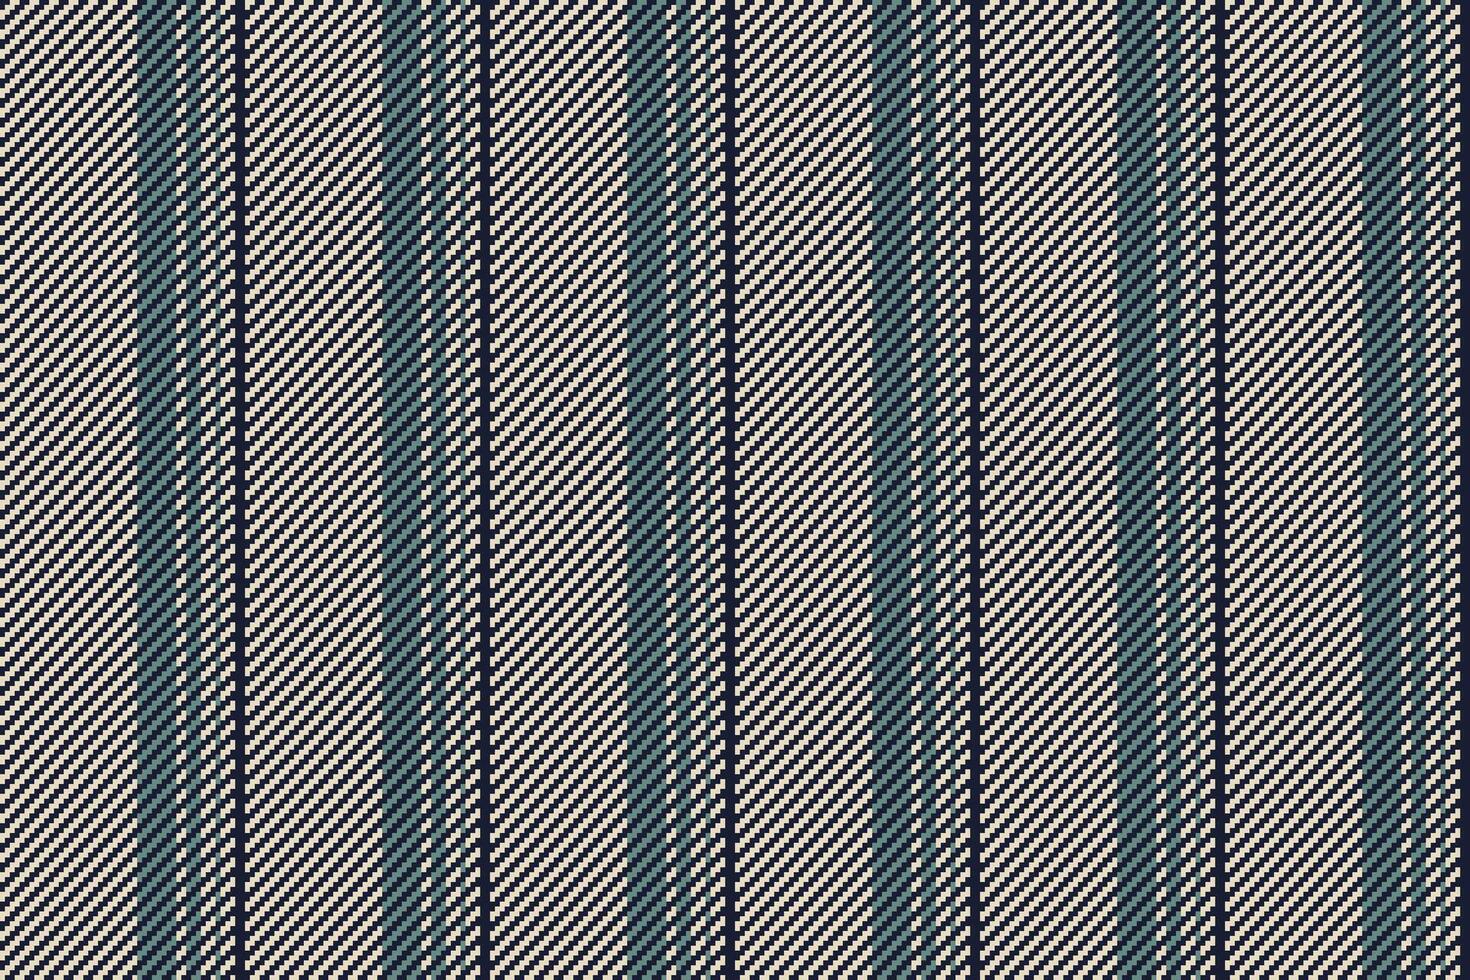 Lines textile of seamless stripe texture with a pattern background vertical fabric. vector